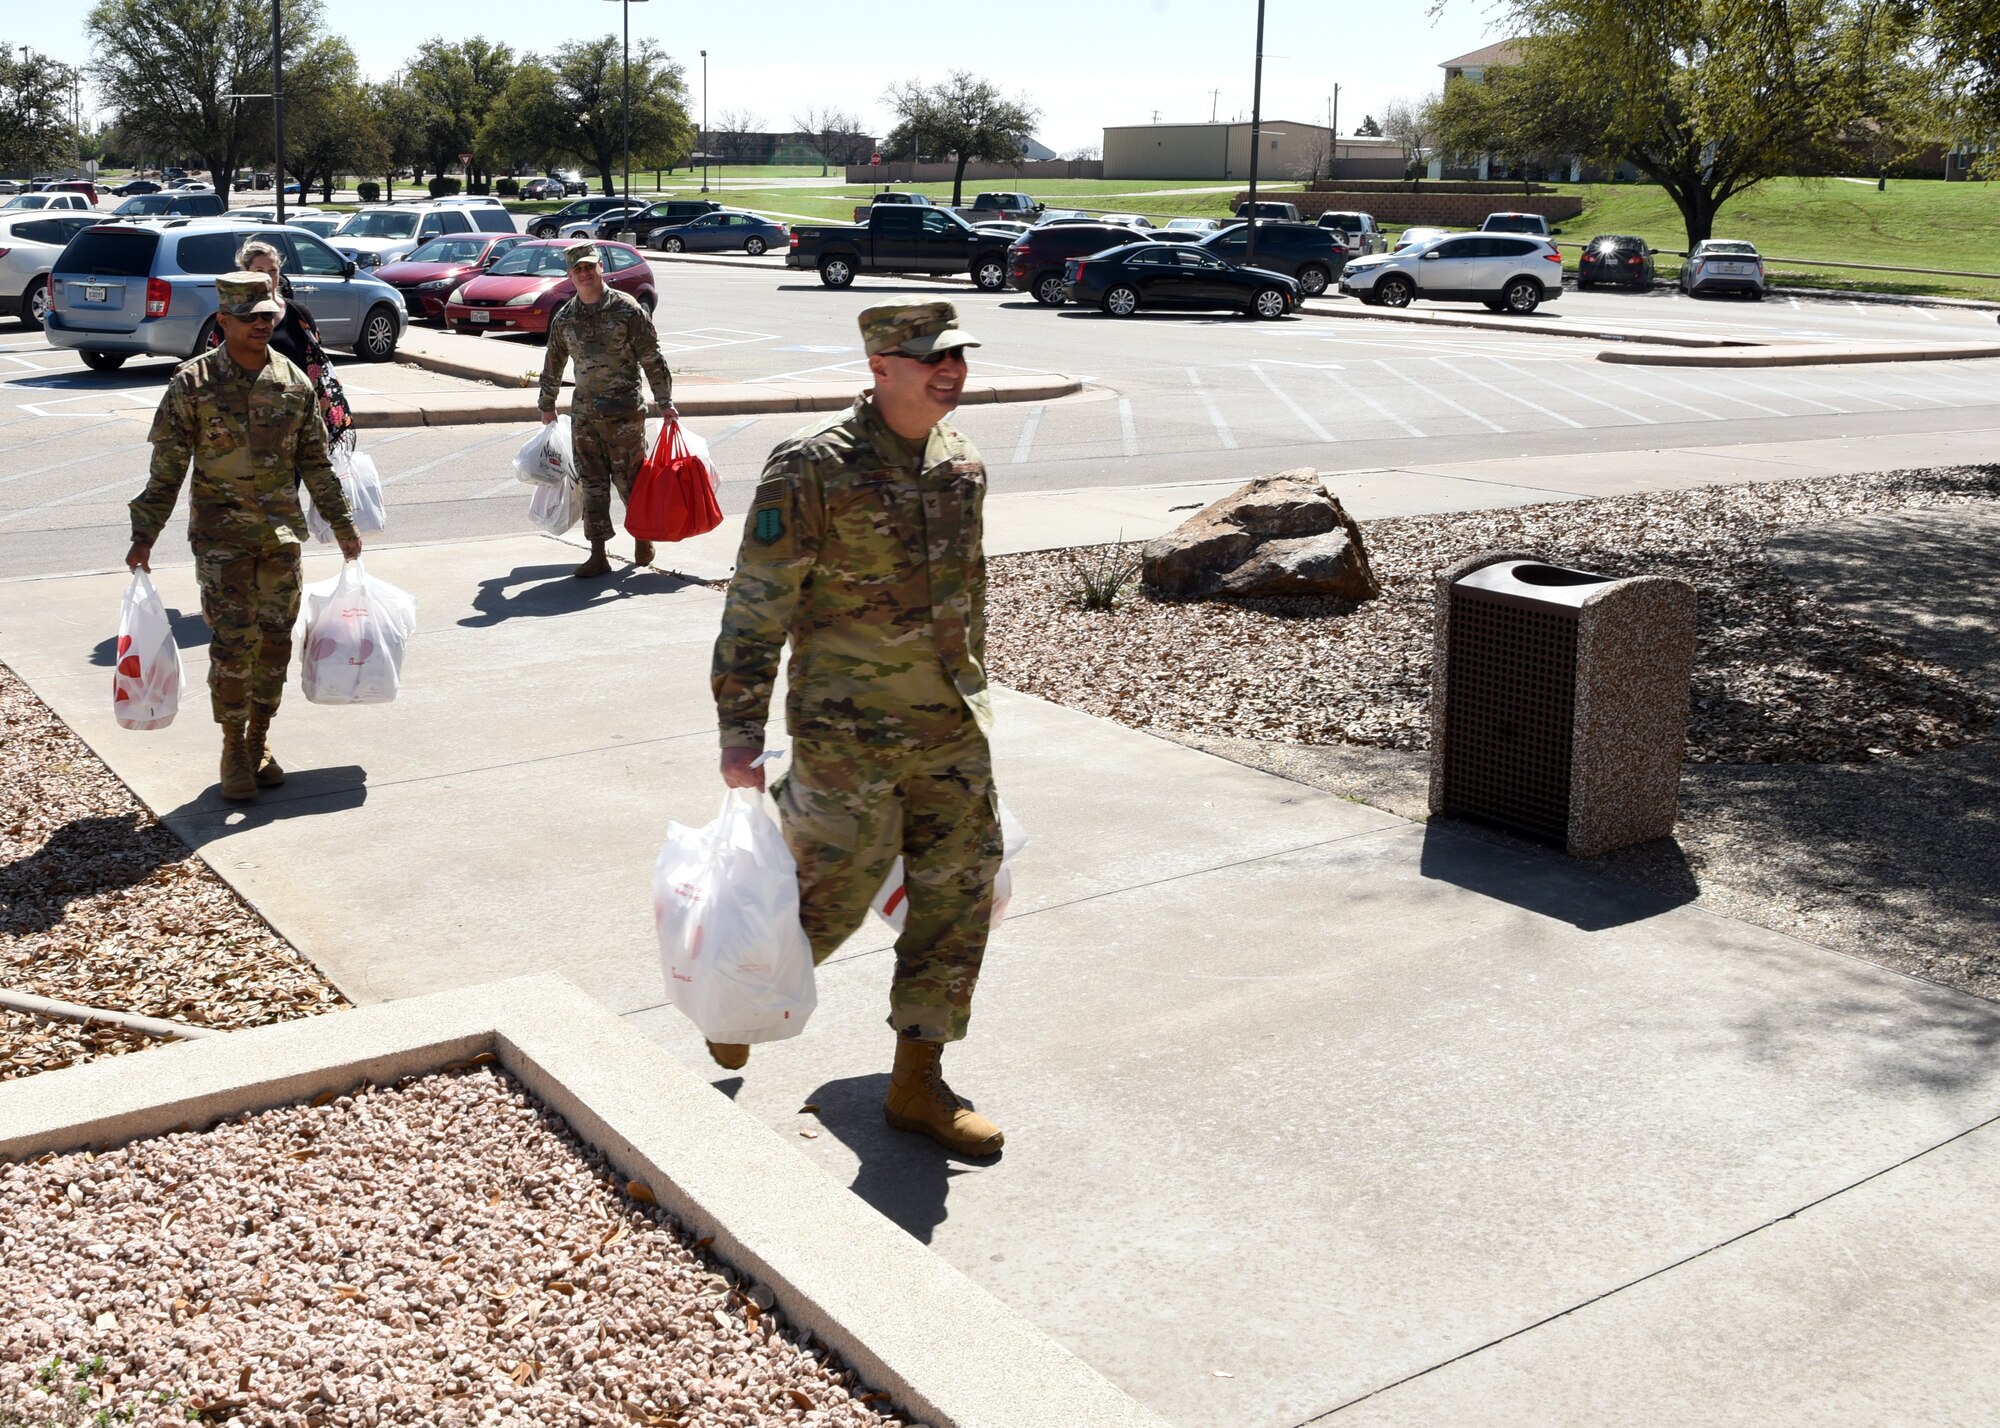 U.S. Air Force Col. Robert Ramirez, 17th Training Wing vice commander, and members of Goodfellow delivers lunch to the 17th Medical Group during a rush of patients at the Ross Clinic on Goodfellow Air Force Base, Texas, March 20, 2020.  The food was donated by the city of San Angelo community partners. (U.S. Air Force photo by Airman 1st Class Abbey Rieves)